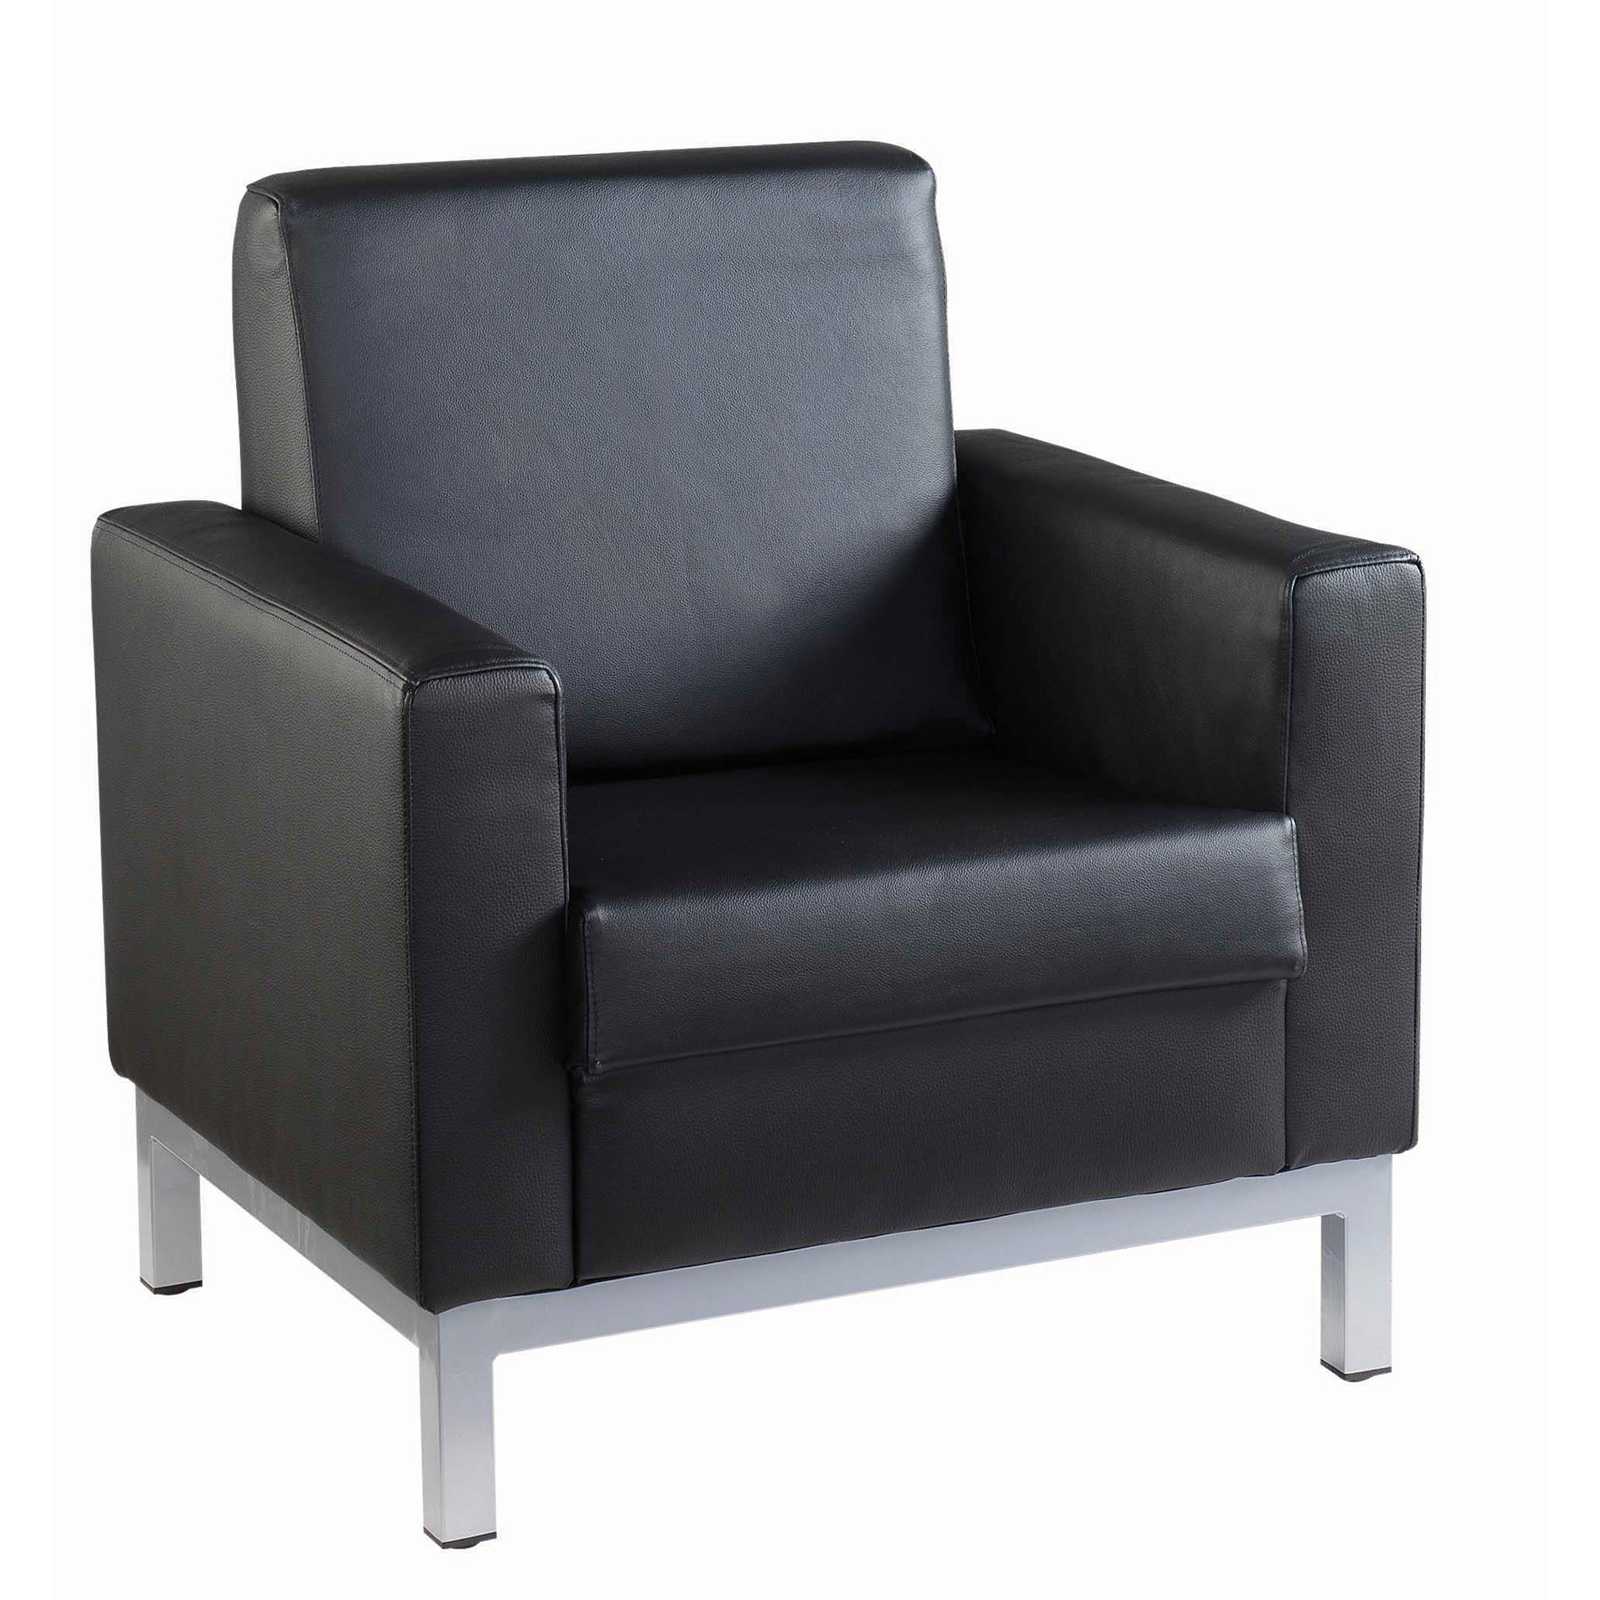 Reception Chairs Helsinki square back reception single tub chair 800mm wide - black leather faced